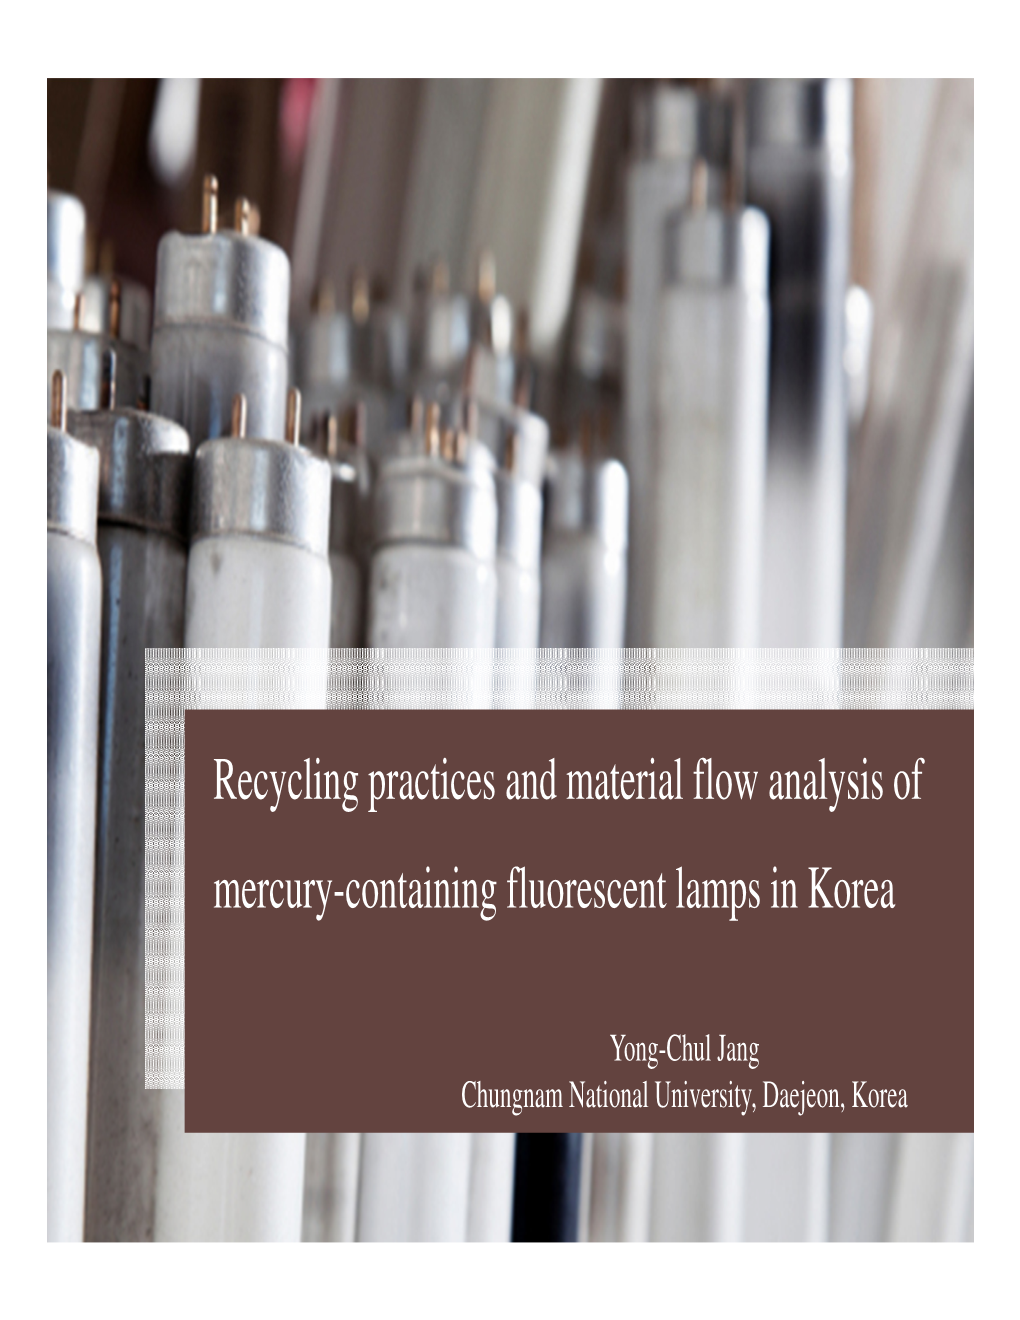 Recycling Practices and Material Flow Analysis of Mercury-Containing Fluorescent Lamps in Korea